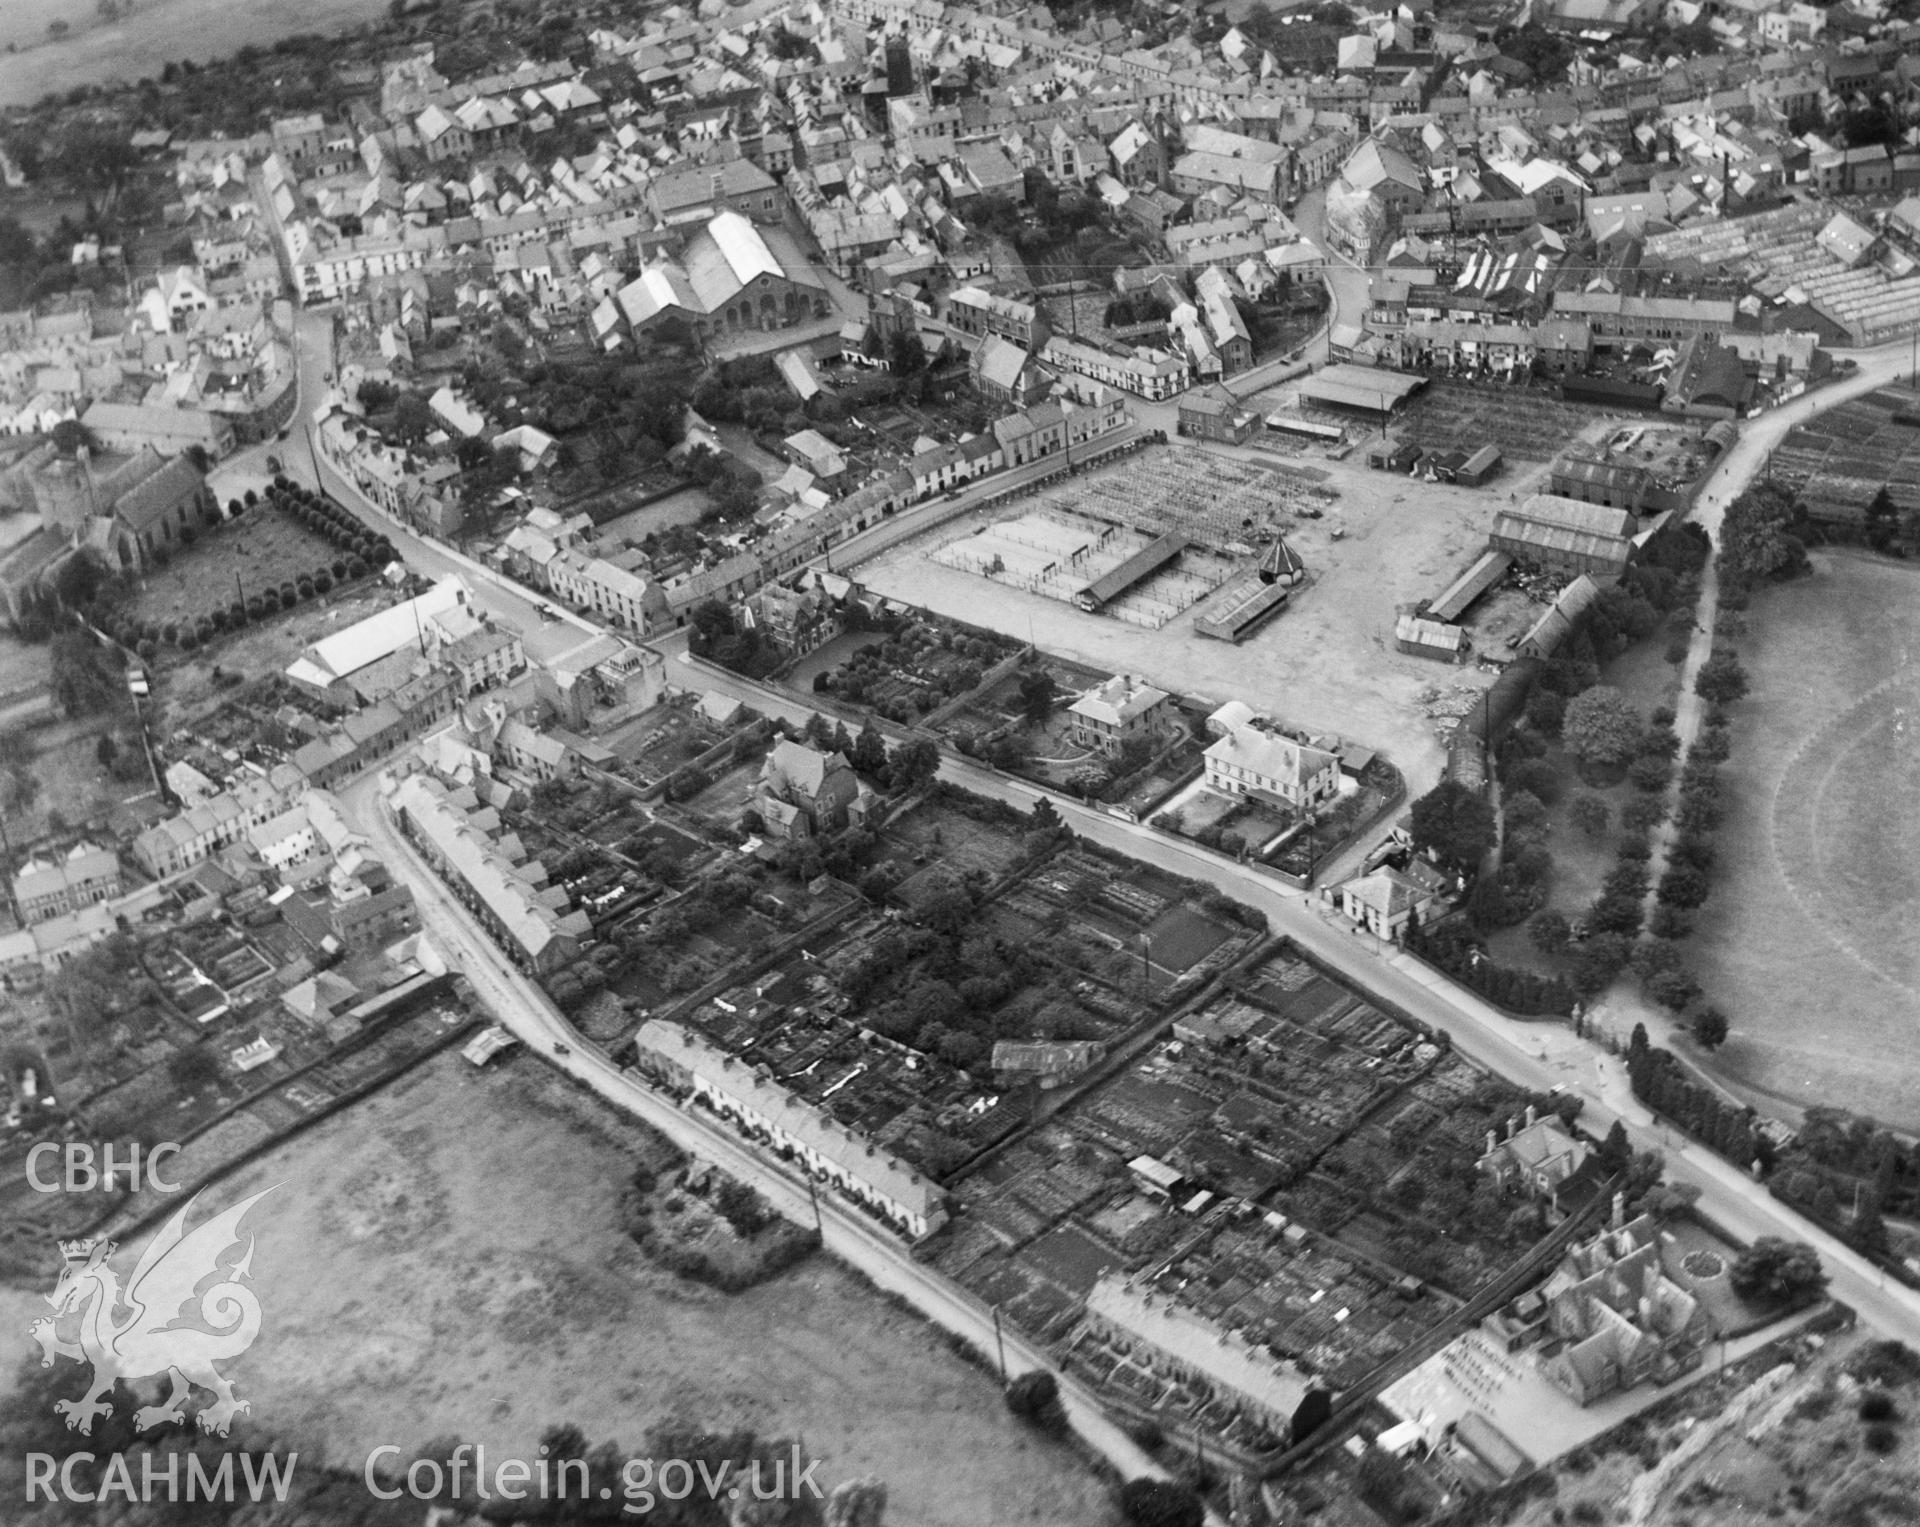 View of Abergavenny showing cattle market and Bailey Park, oblique aerial view. 5?x4? black and white glass plate negative.